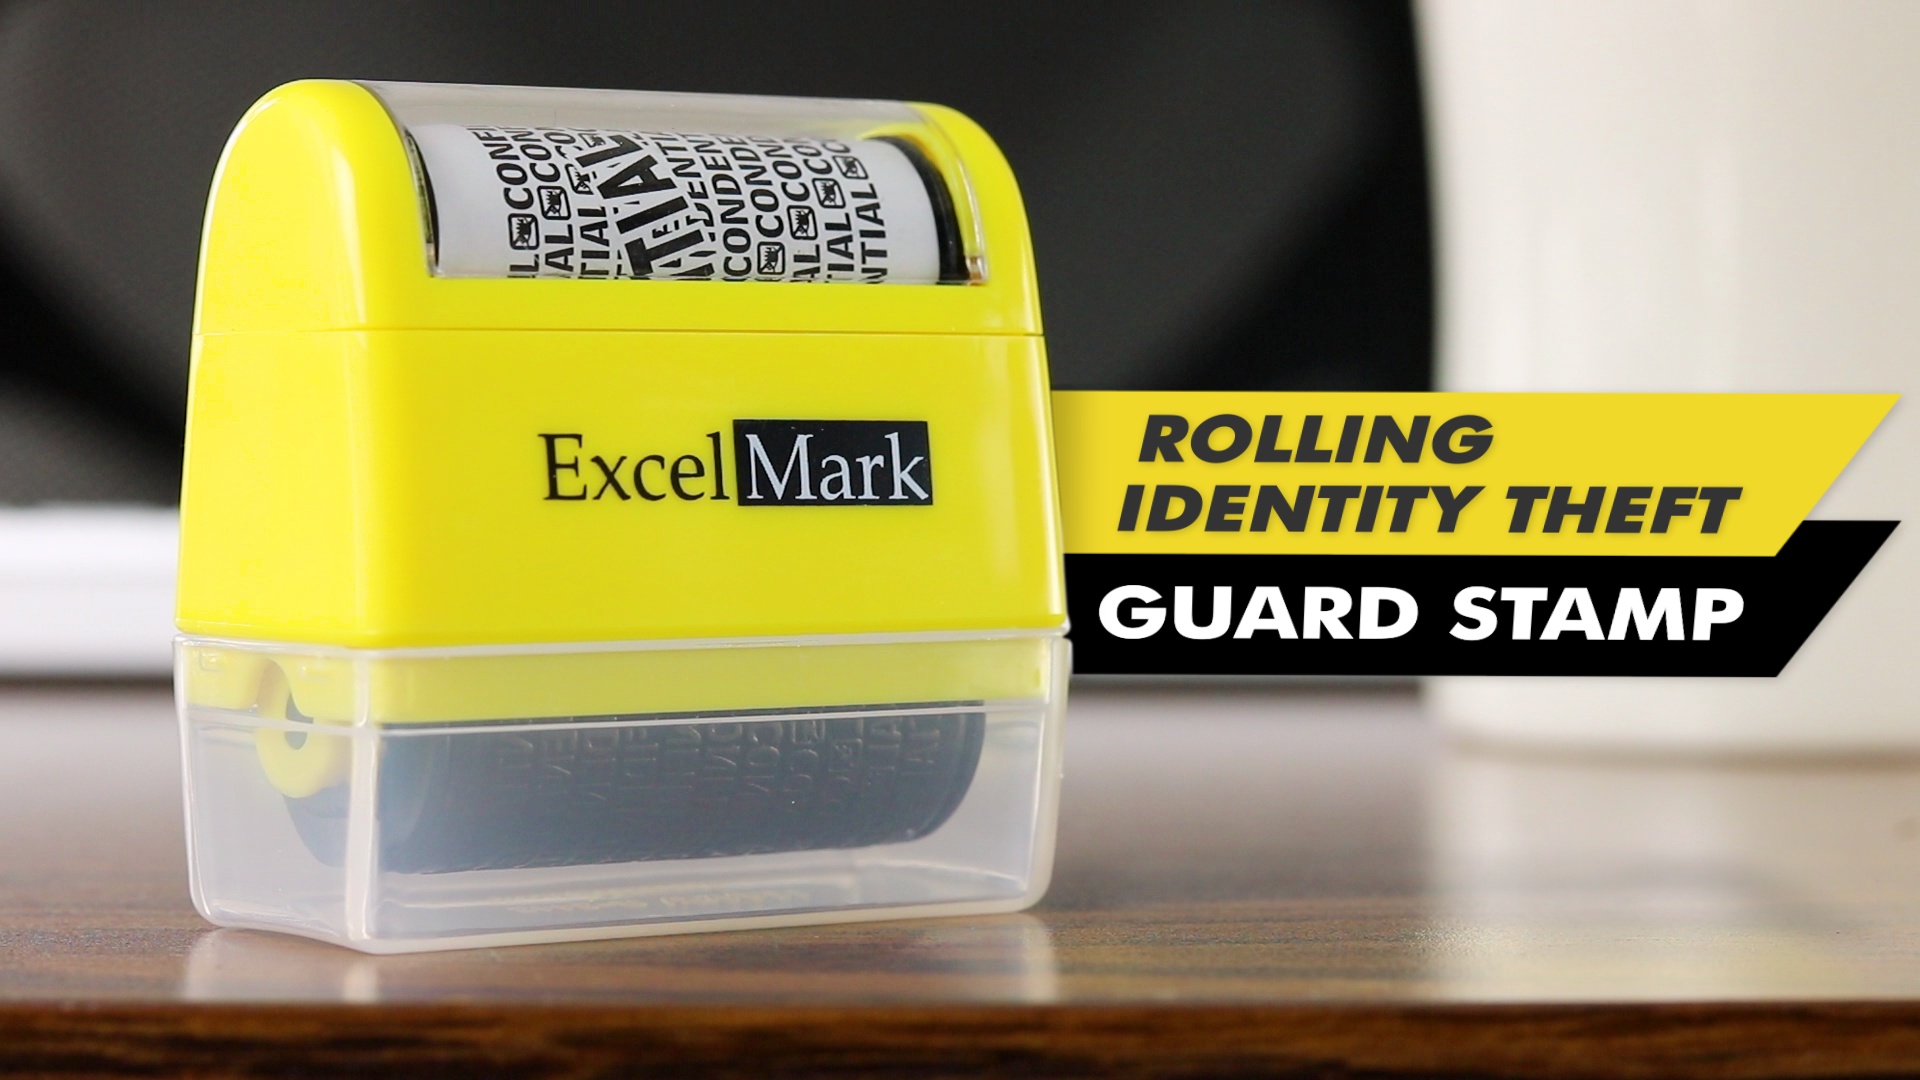 Roller stamp data security protection theft prevention id identity*guard rolJKH 